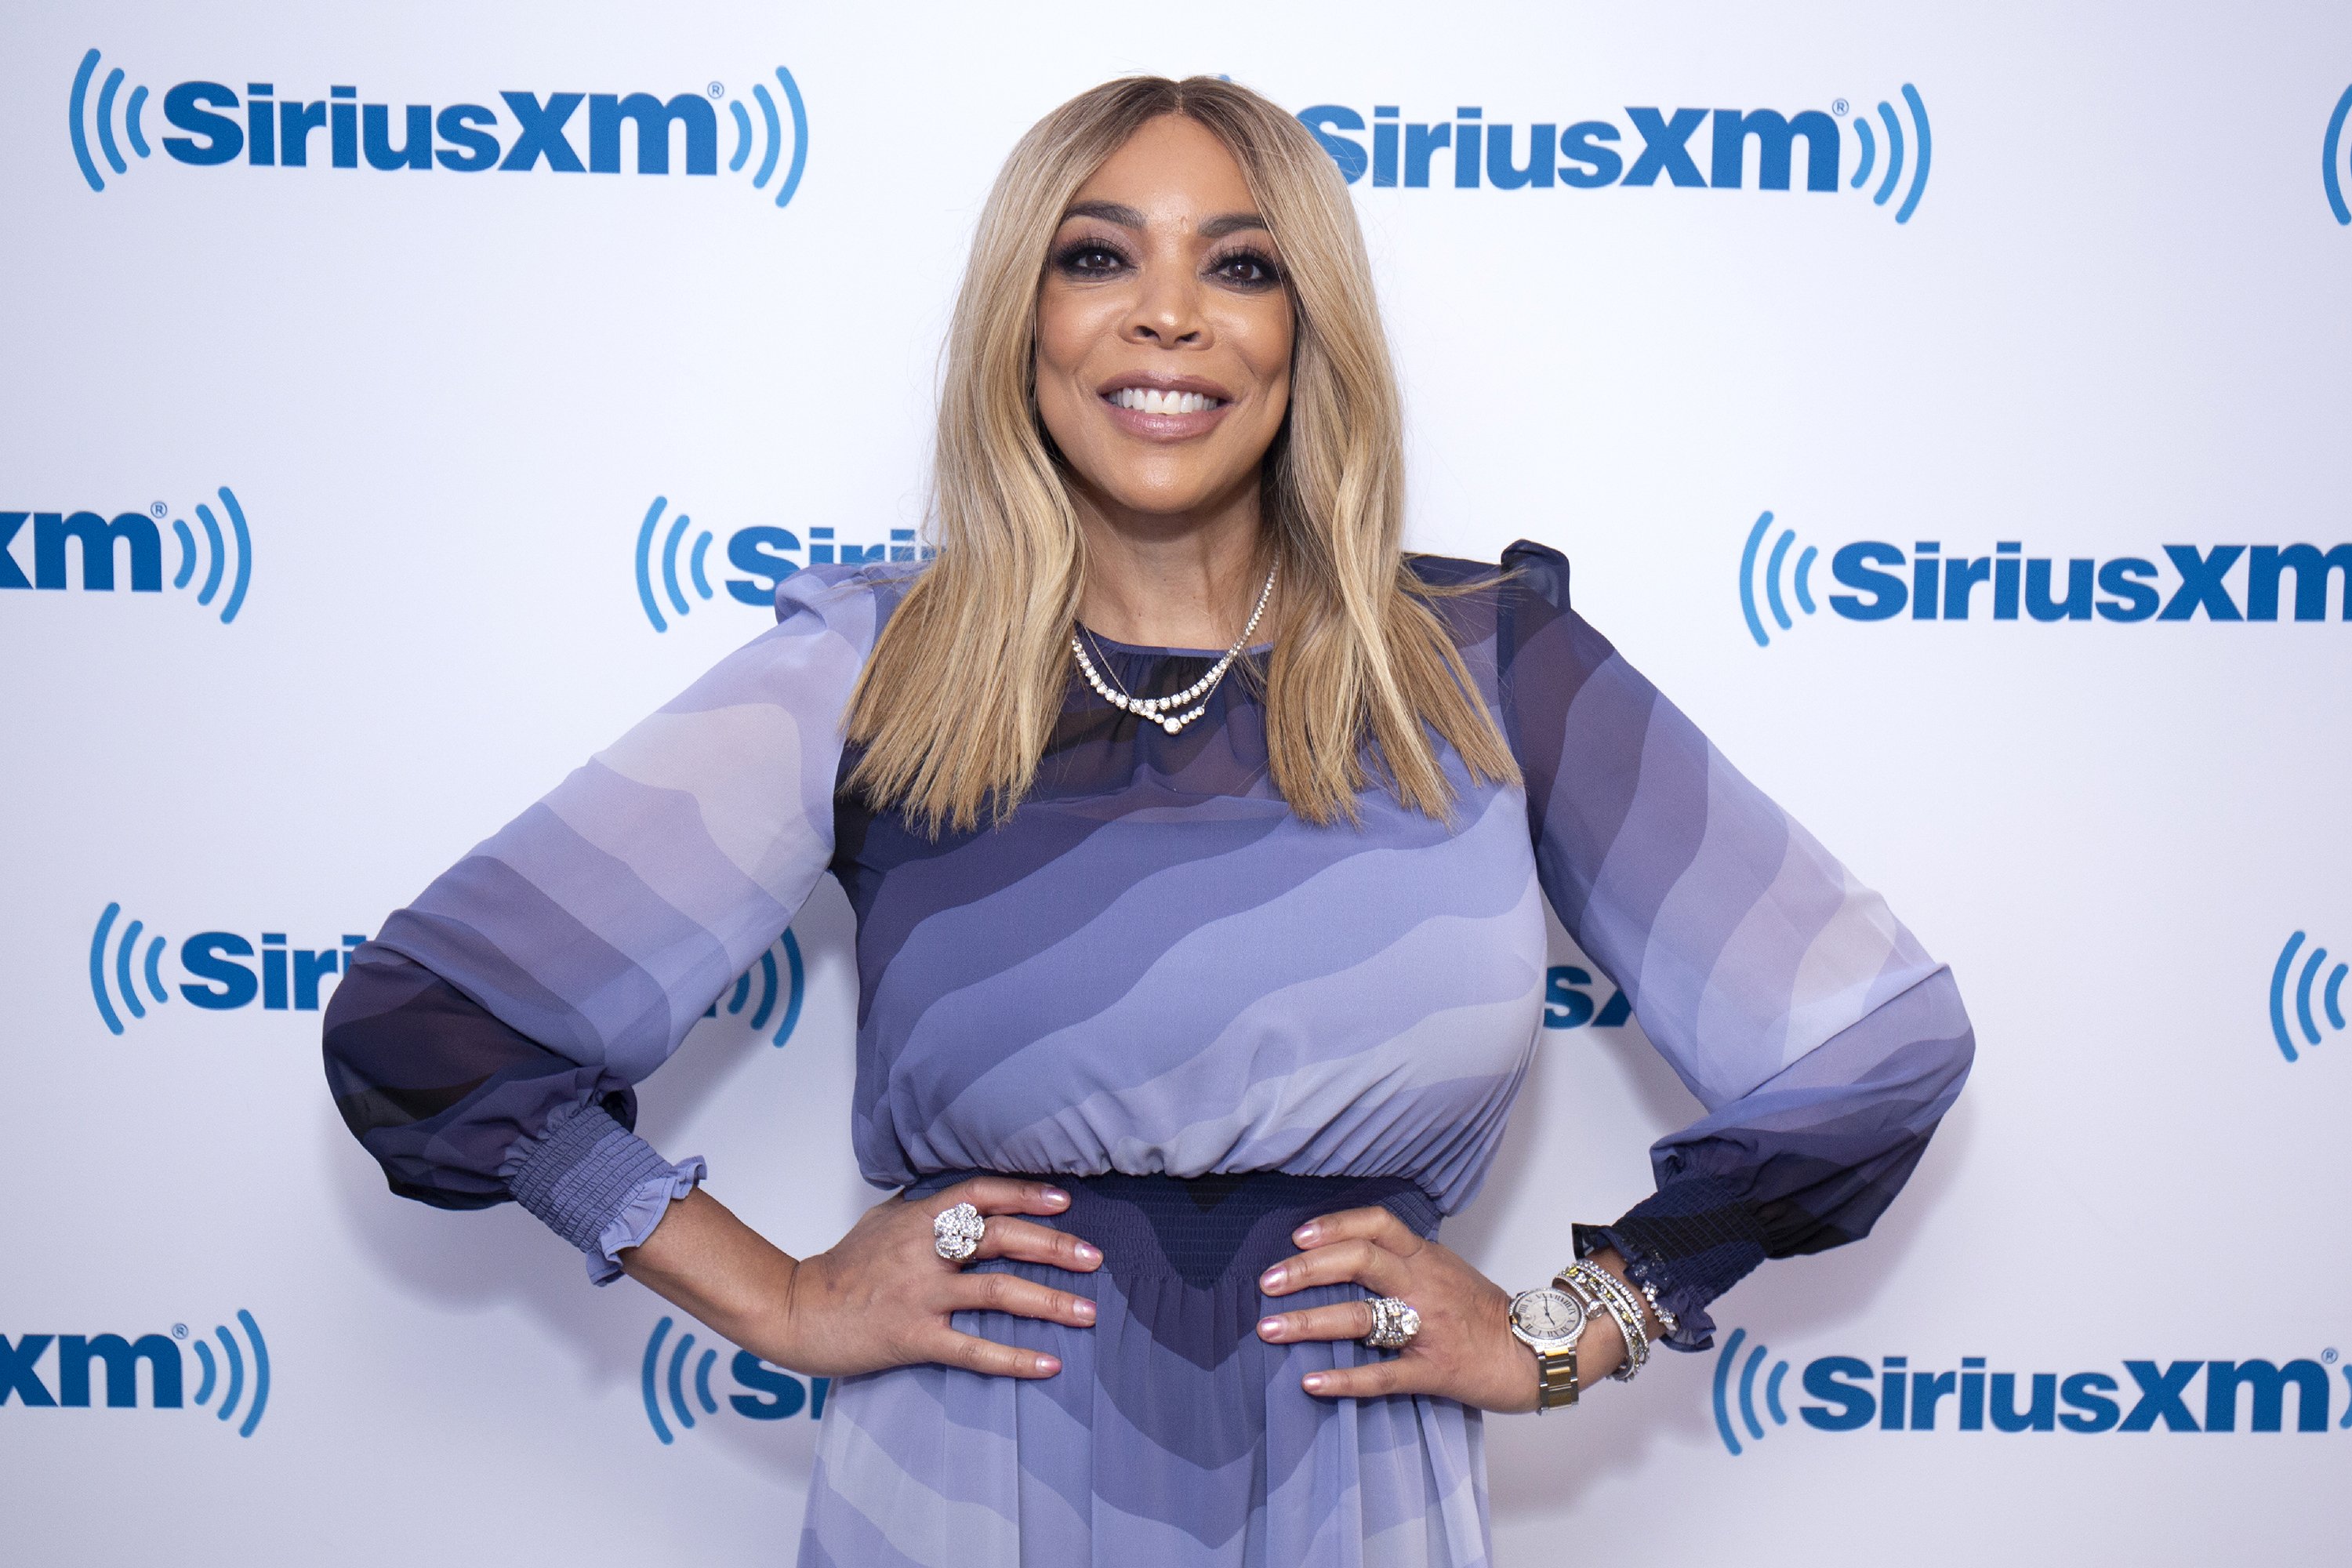 Wendy Williams visits SiriusXM Studios on Sept. 6, 2018 in New York City | Photo: Getty Images